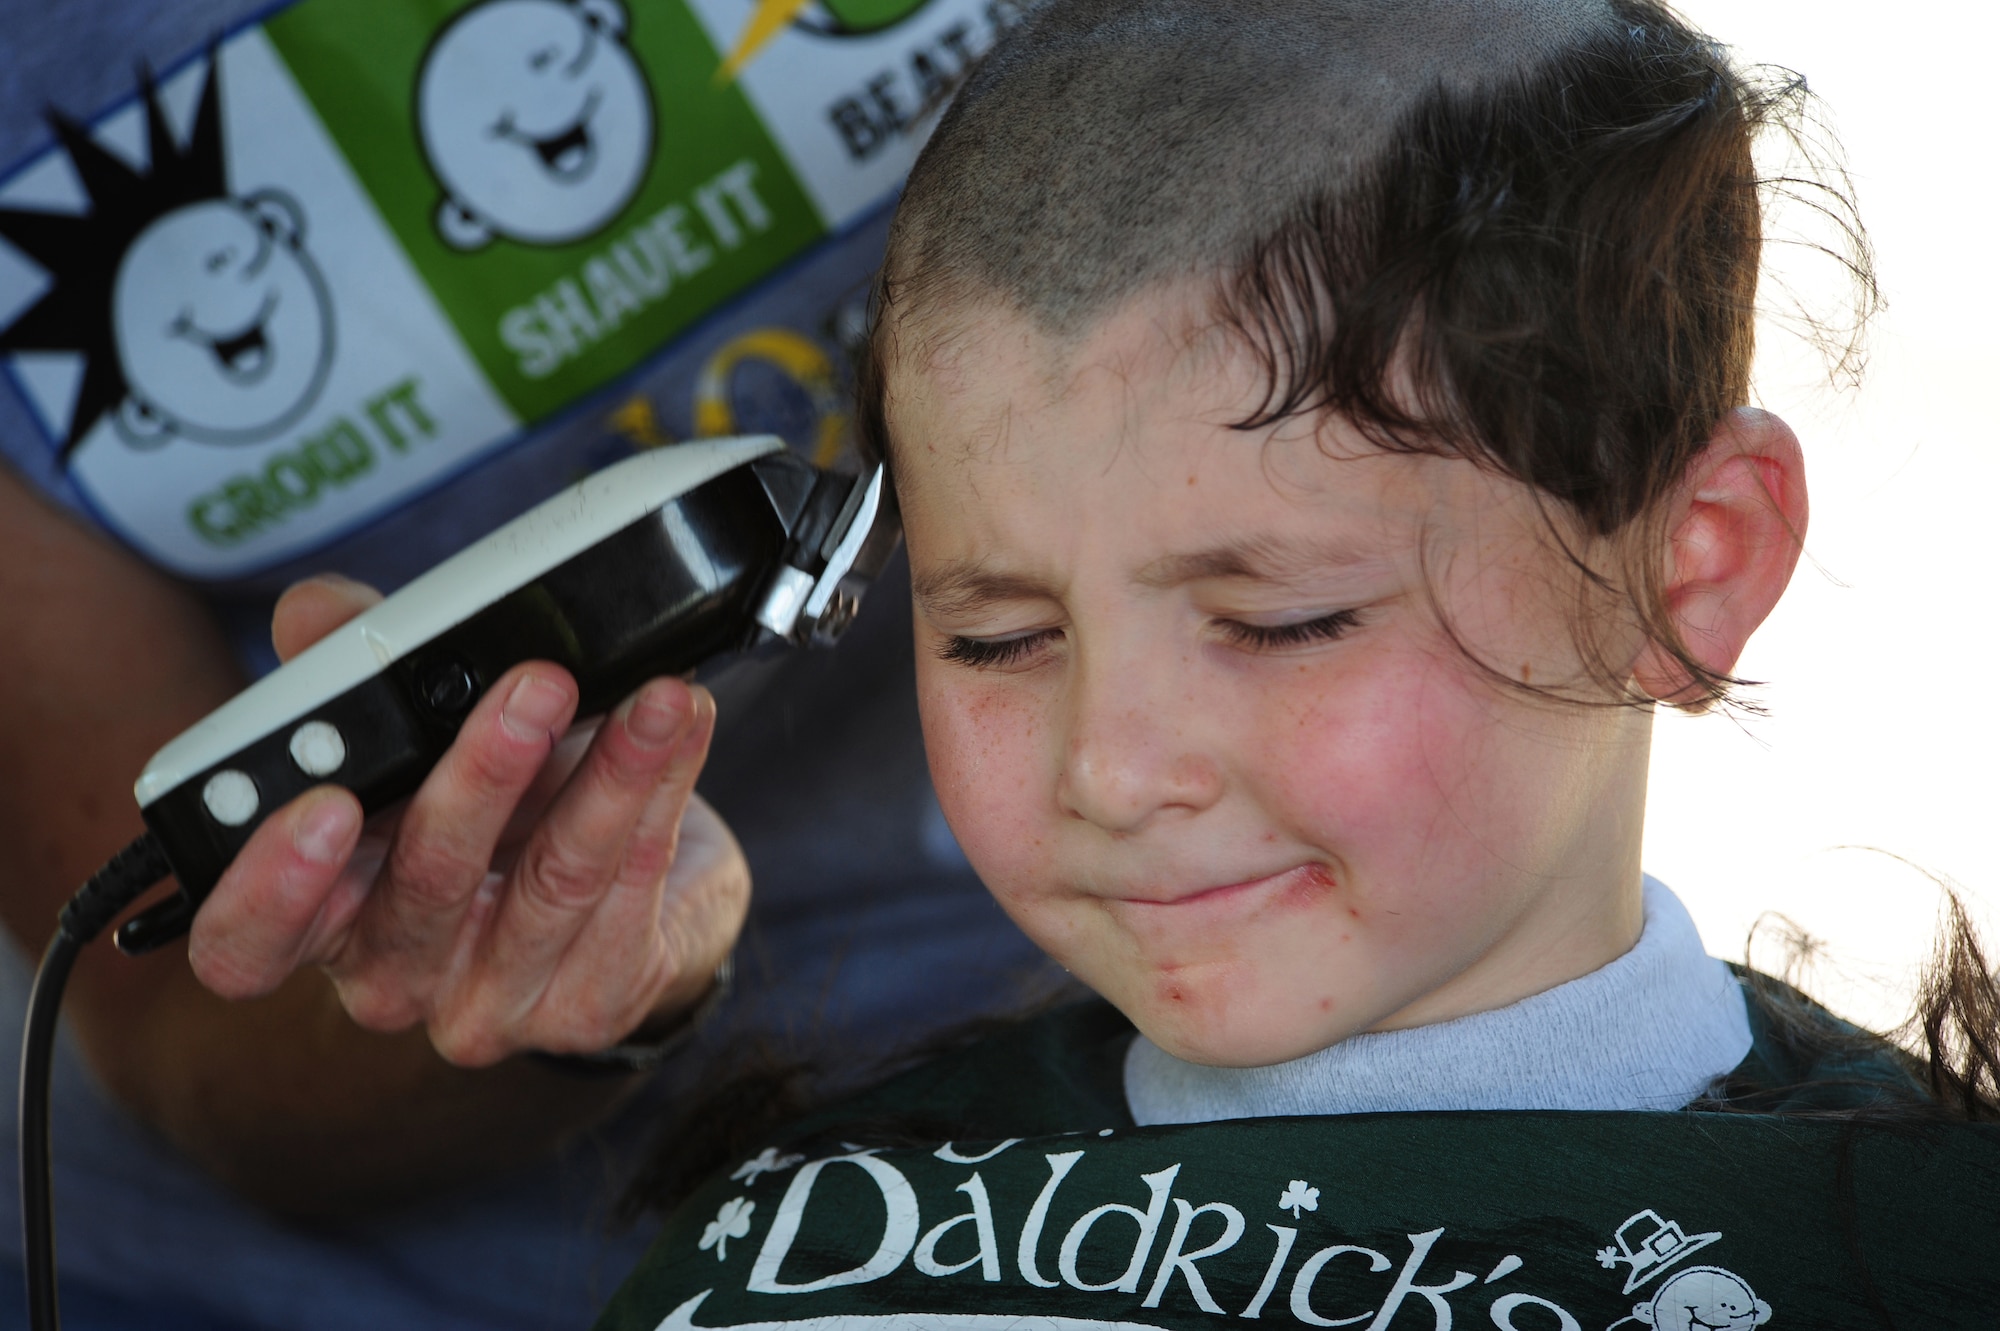 Jacob Torres, 7, son of U.S. Air Force Major Christopher Torres 603 Air and Space Operations Center deputy chief of operations, has his head shaved in participation of the first ever St. Baldrick's event held on Ramstein Air Base, Germany, June 26, 2010. The St. Baldrick's Foundation is an organization that tasks volunteers with getting sponsored to have their heads shaved as a demonstration of their camaraderie to children that have been diagnosed with cancer. (U.S. Air Force Photo by Staff Sgt. Jocelyn Rich)